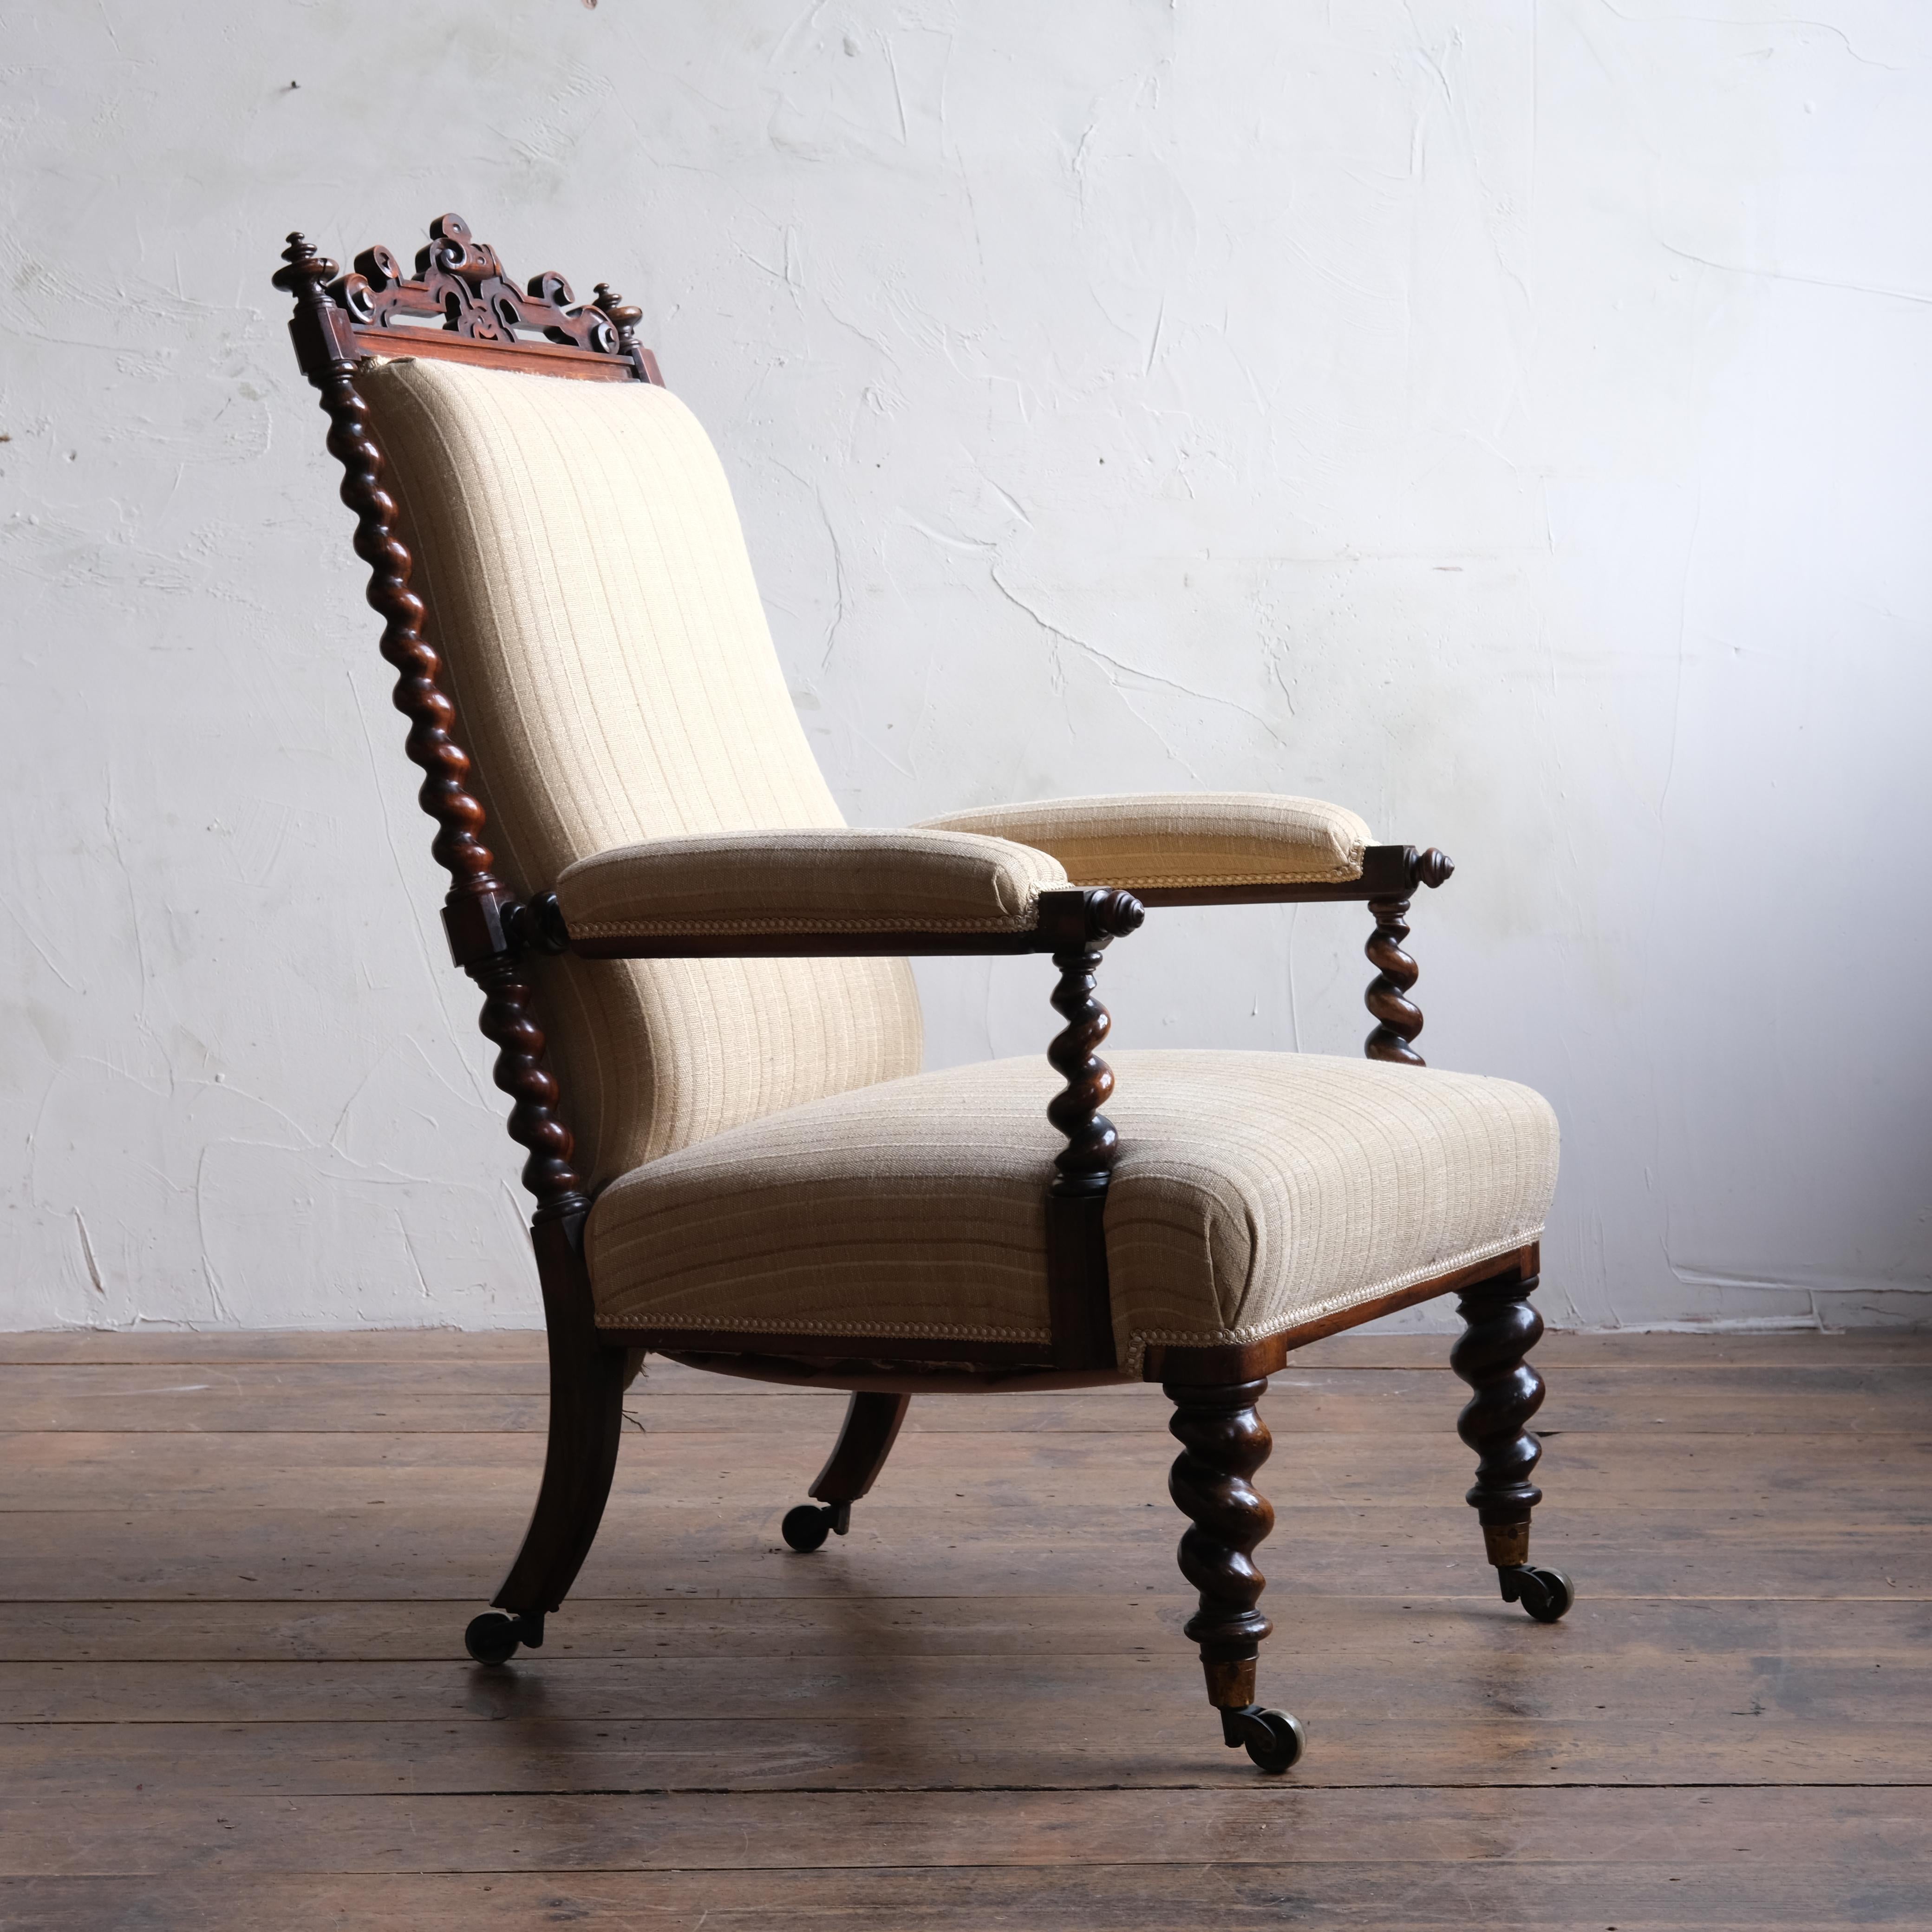 British Miles and Edwards Rosewood Open Armchair, circa 1840